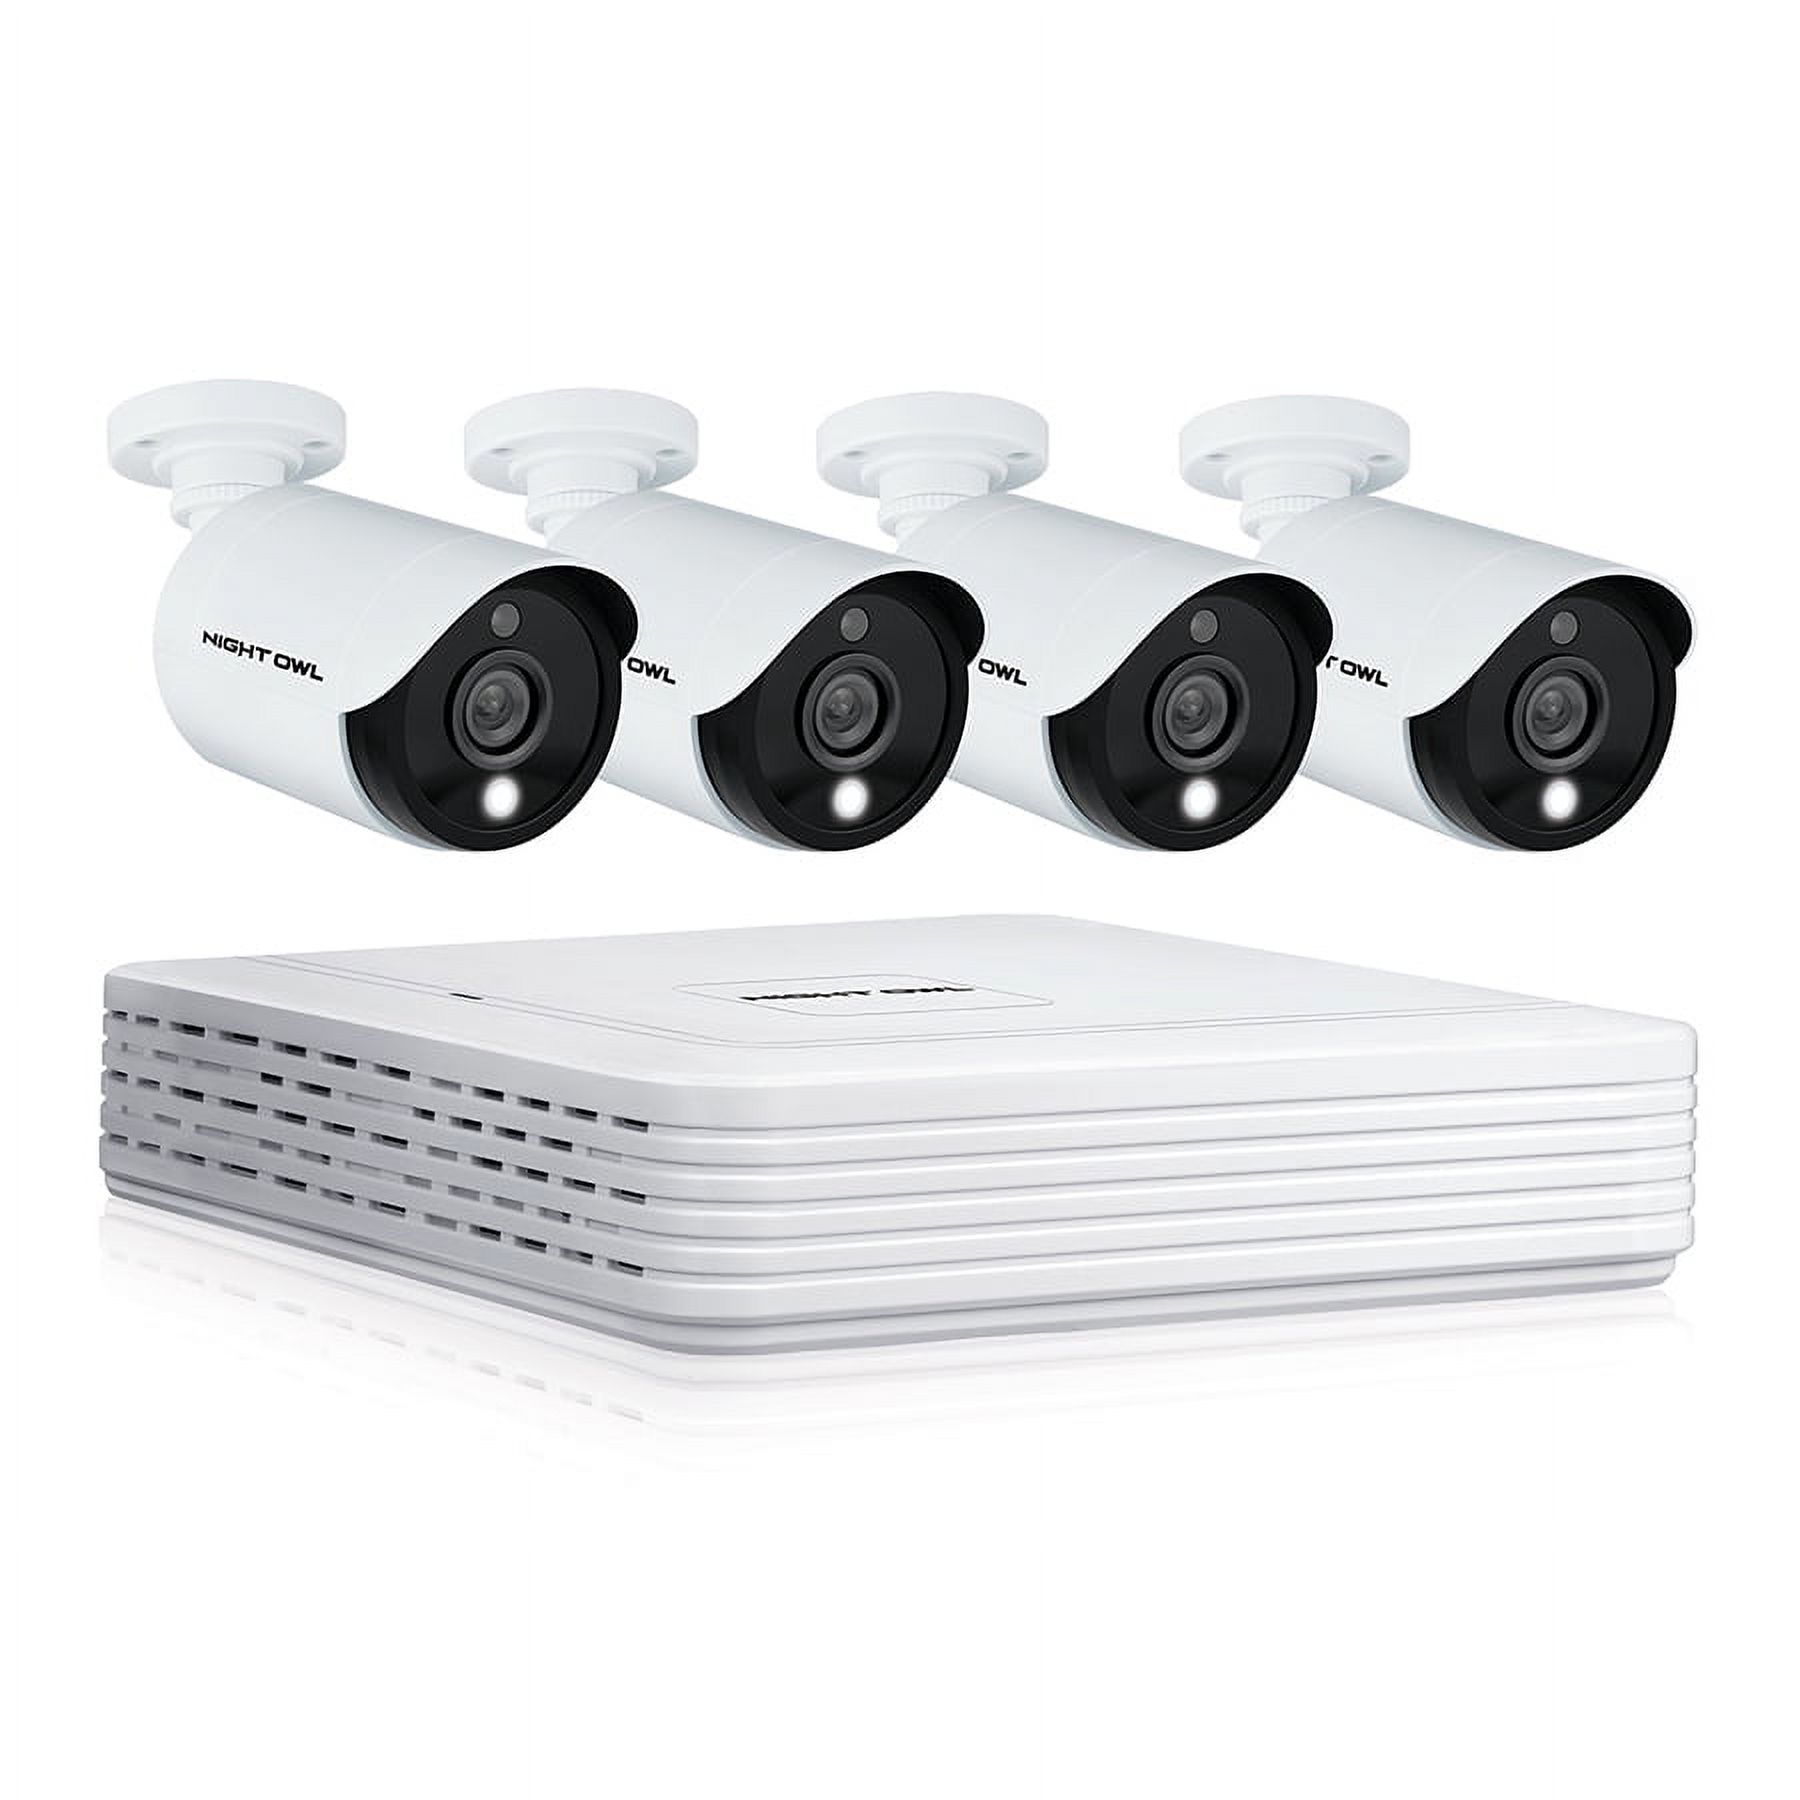 Night Owl Wired 4 Channel DVR with Pre-Installed 1TB Hard Drive and (4) 1080p HD Wired Spotlight Cameras - image 1 of 8